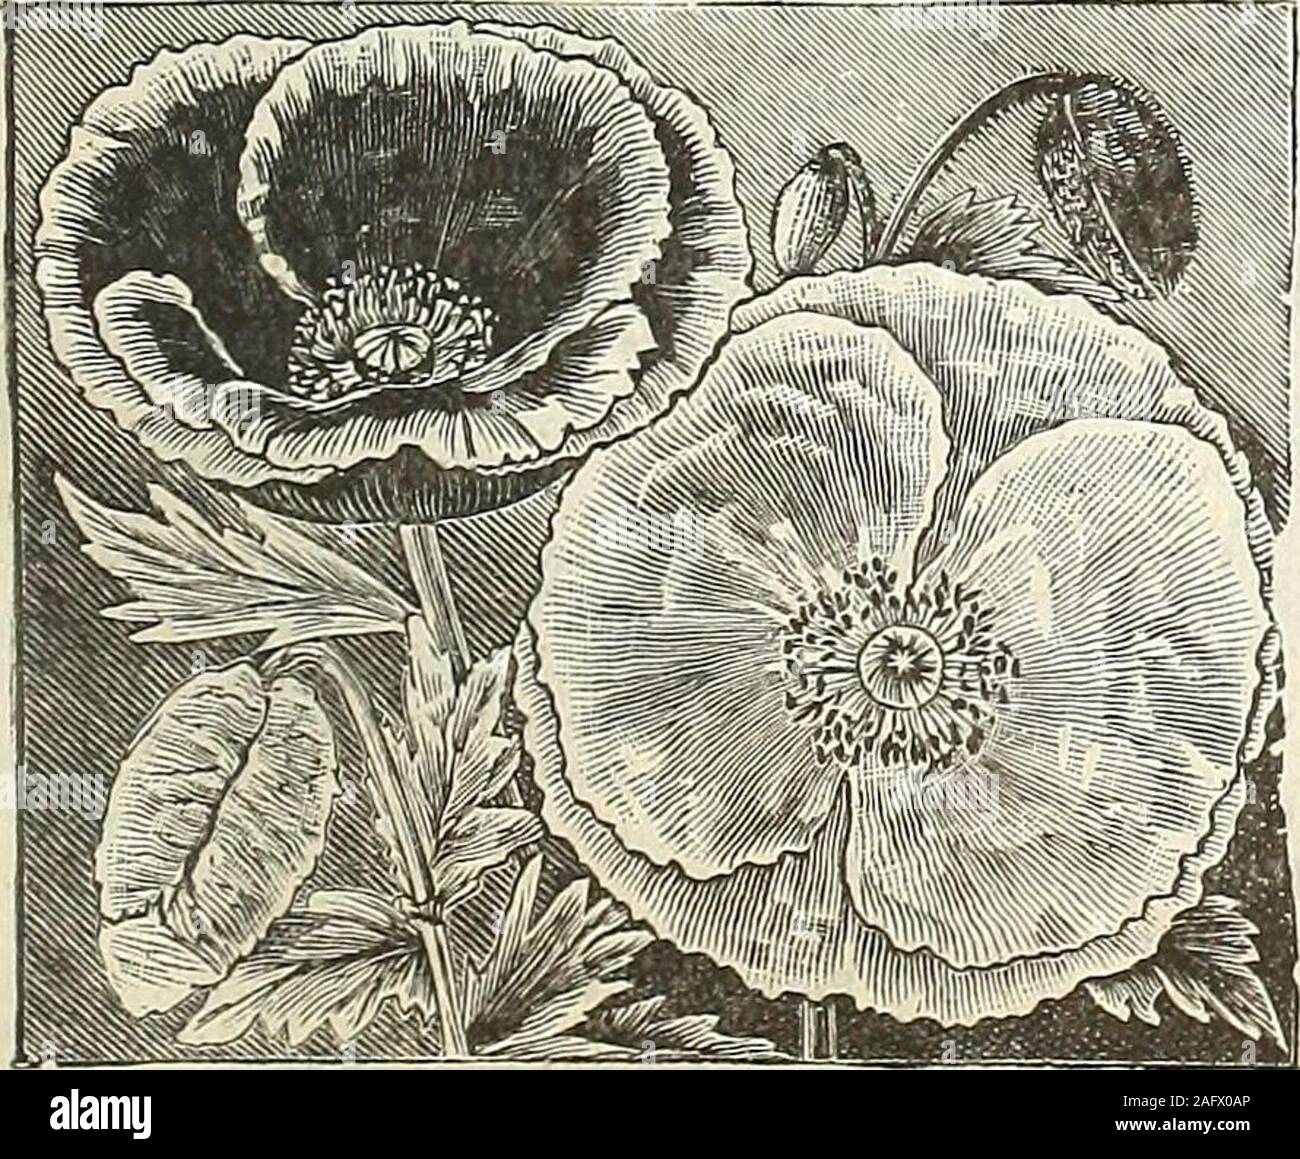 . James J.H. Gregory & Son's catalogue of home grown seeds. ly shaped and of the purest possible white, andcontinues longer in bloom than other Poppies 15 322 —— Umbrosum. Very fine, with flowers of a brilliant deep scar- let, marked with four large black spots 10 323 Double. Mixed. Brilliant and showy; about two feet high; fine for background and shrubbery 05 324 Fairy Blush. Immense globular flowers; perfectly double, petals elegantly fringed, color pure white, tipped with rose, 10 325 Danebrog. The flowers are of a brilliant scarlet color, bearing on each of the four petals a large silvery- Stock Photo